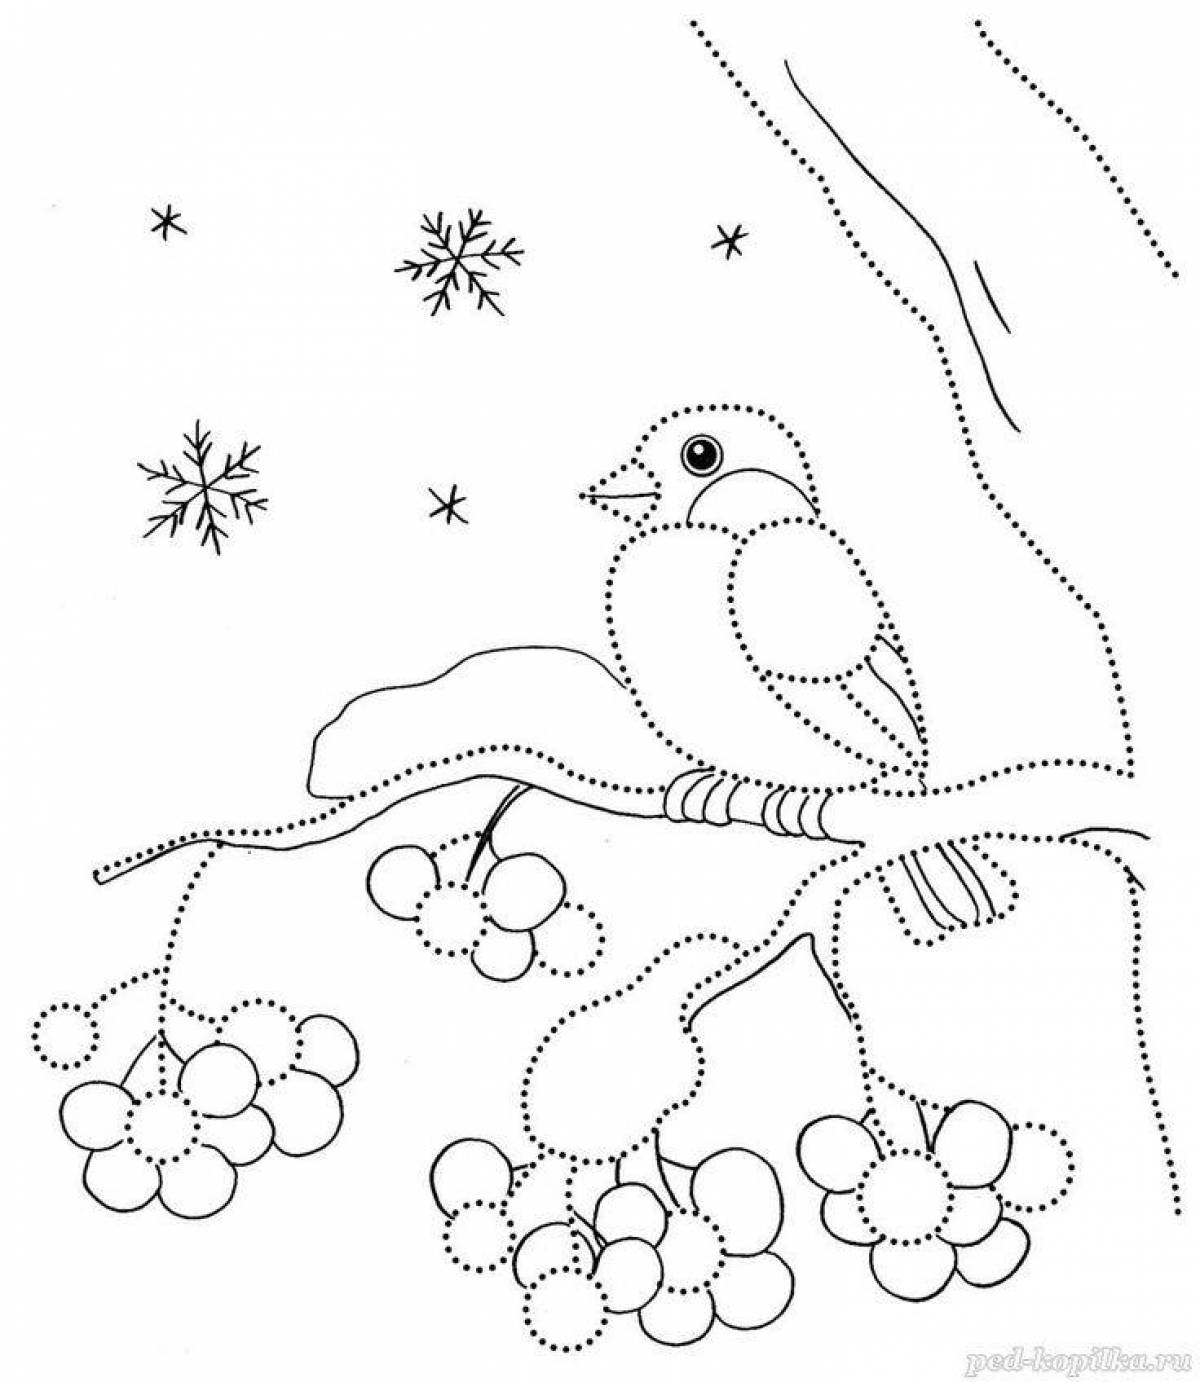 Coloring live wintering birds for children 3-4 years old